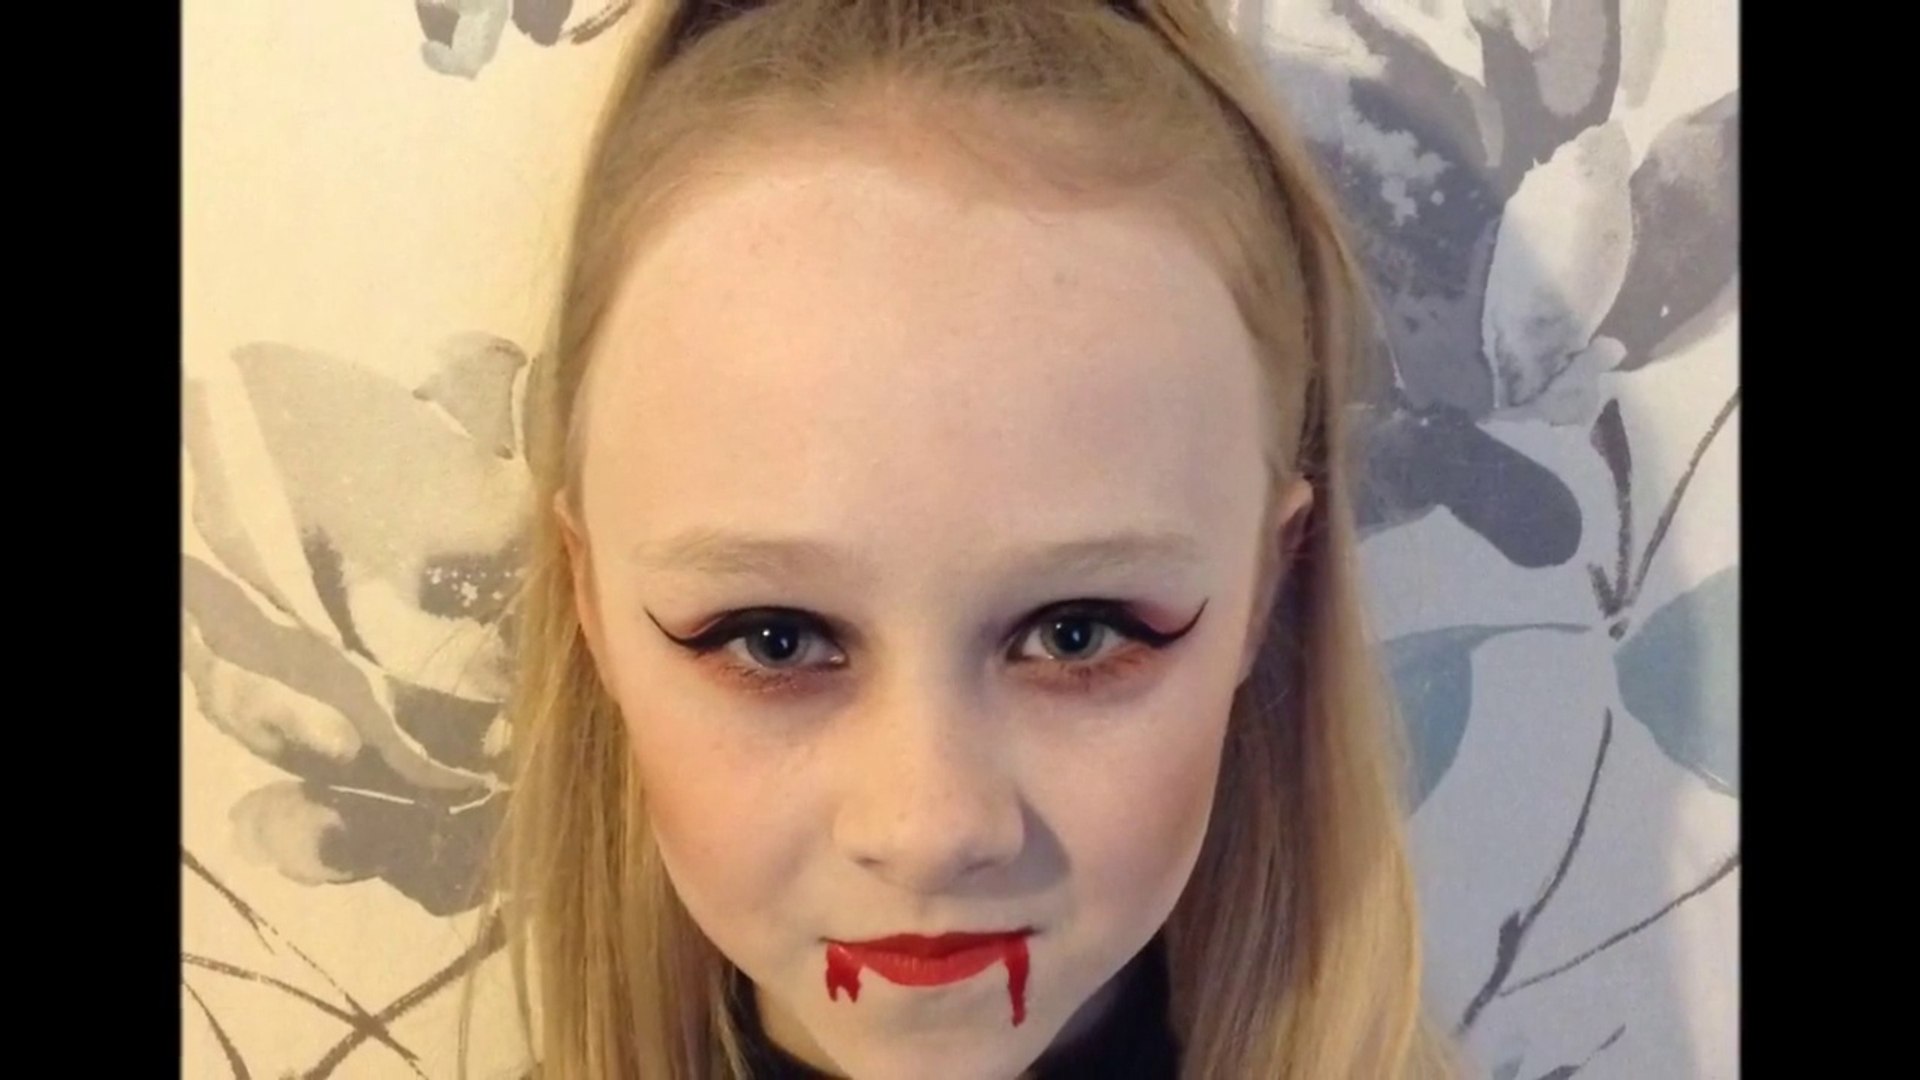 Vampire face paint: Halloween face painting ideas for kids